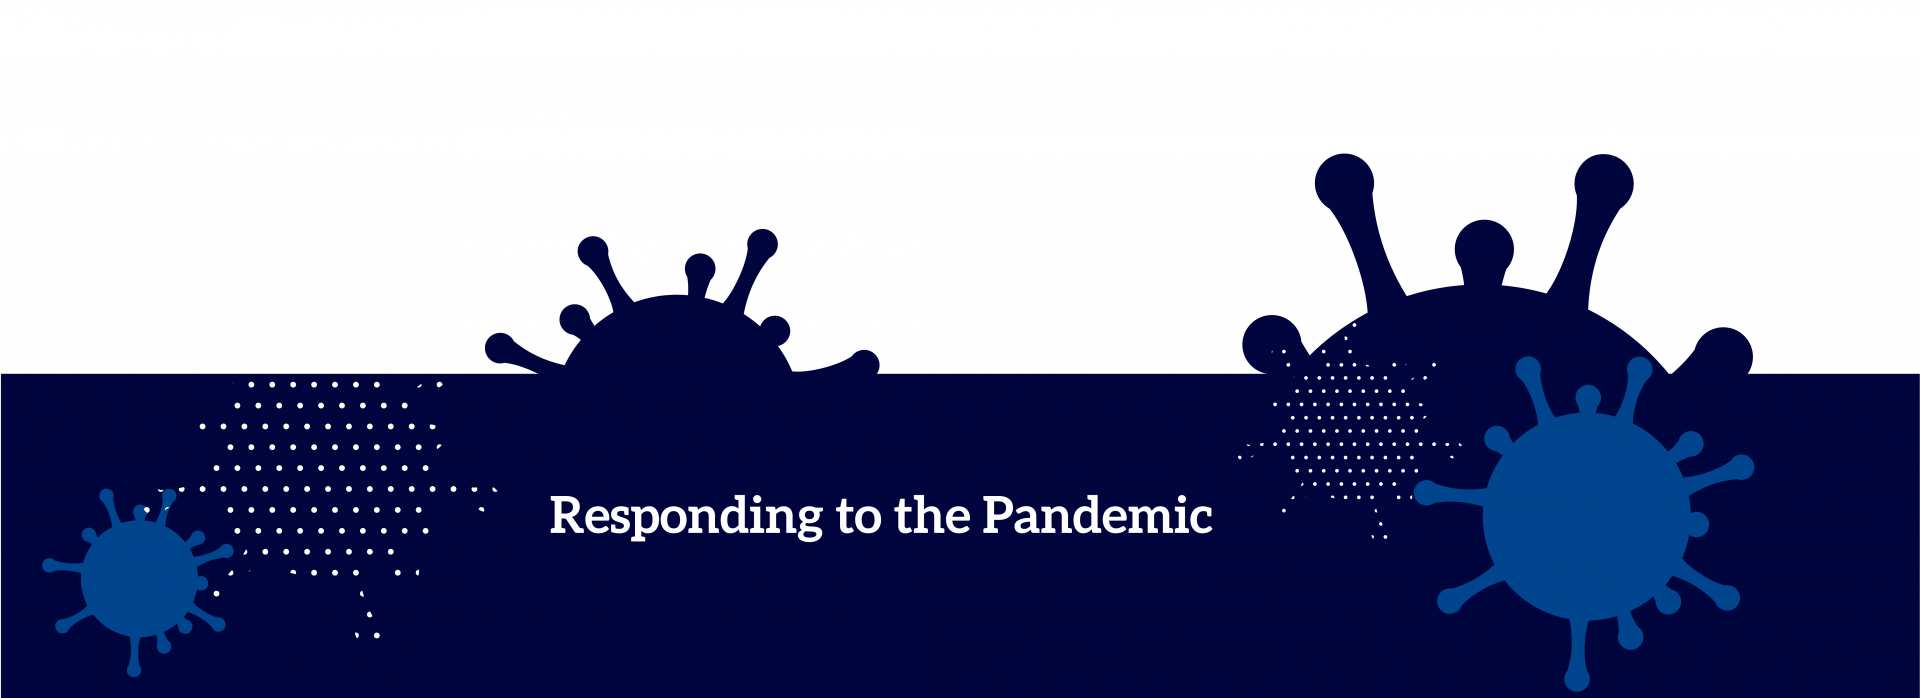 Responding to the Pandemic